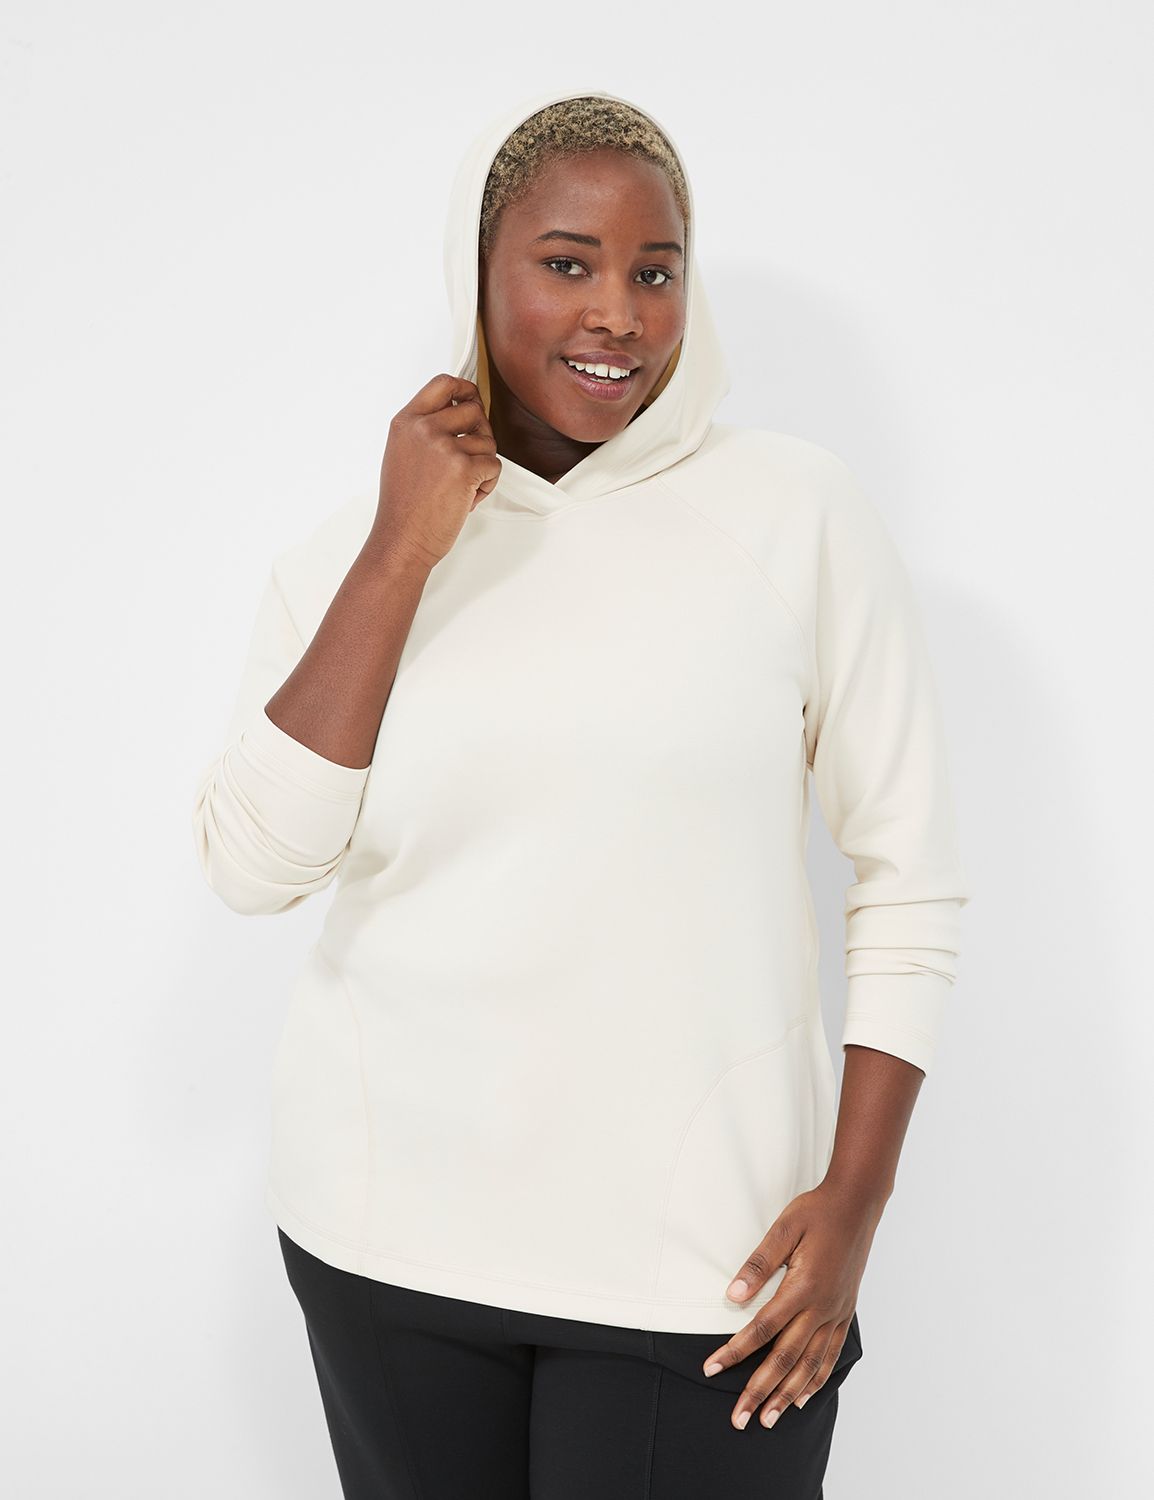 Womens Plus Size Hoodies & Pullovers.